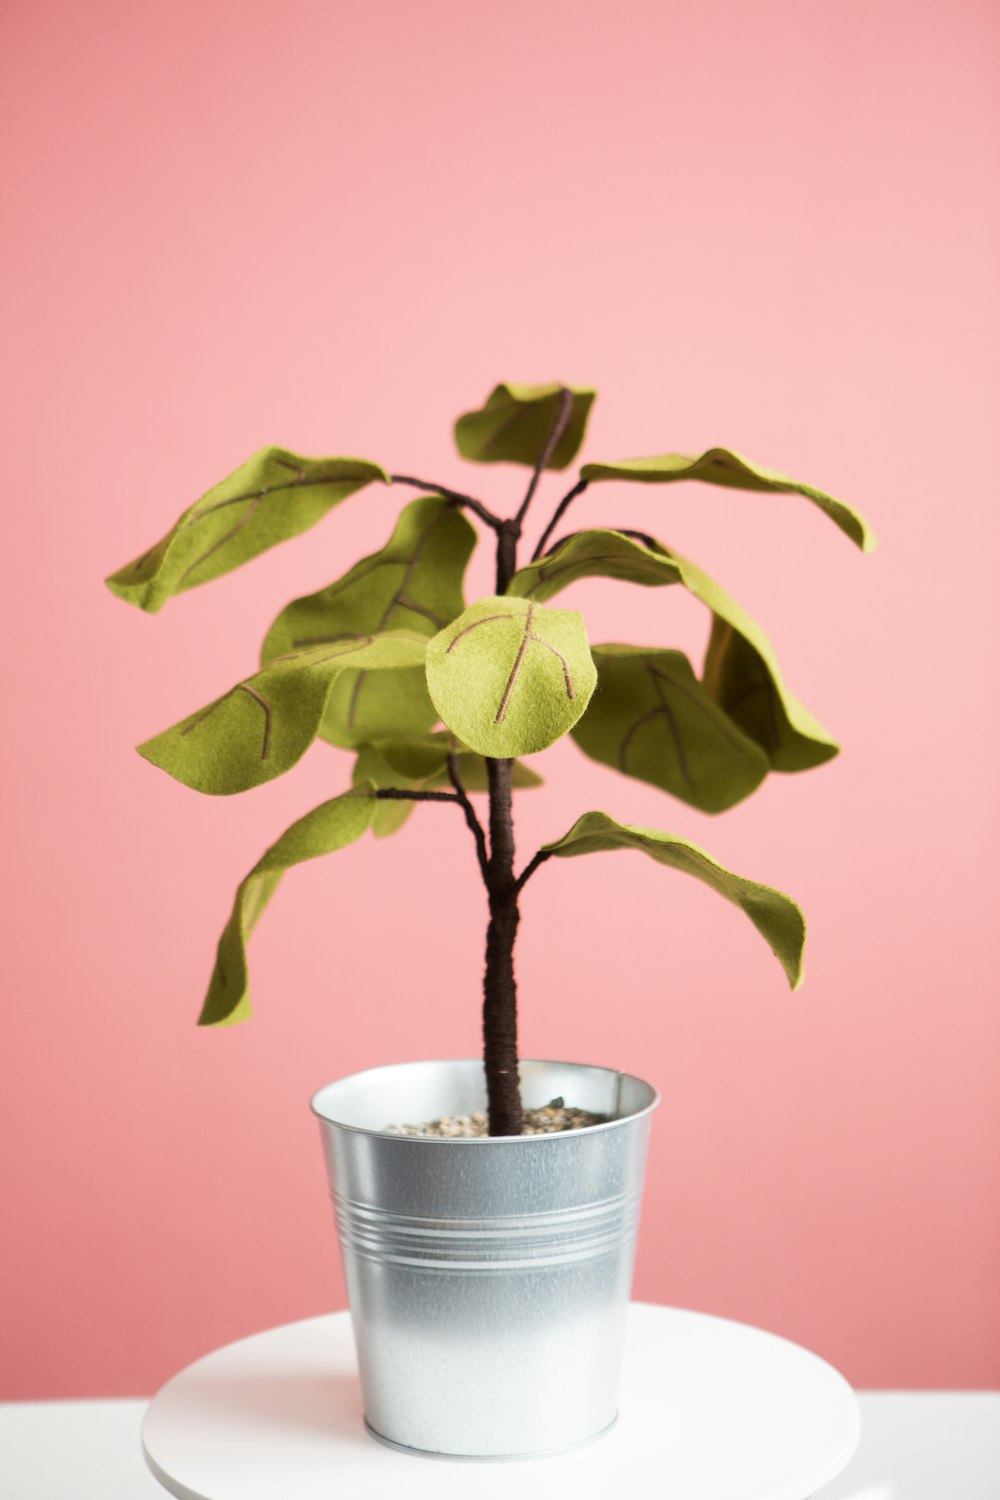 green leafed plant in tin pot by pink wall